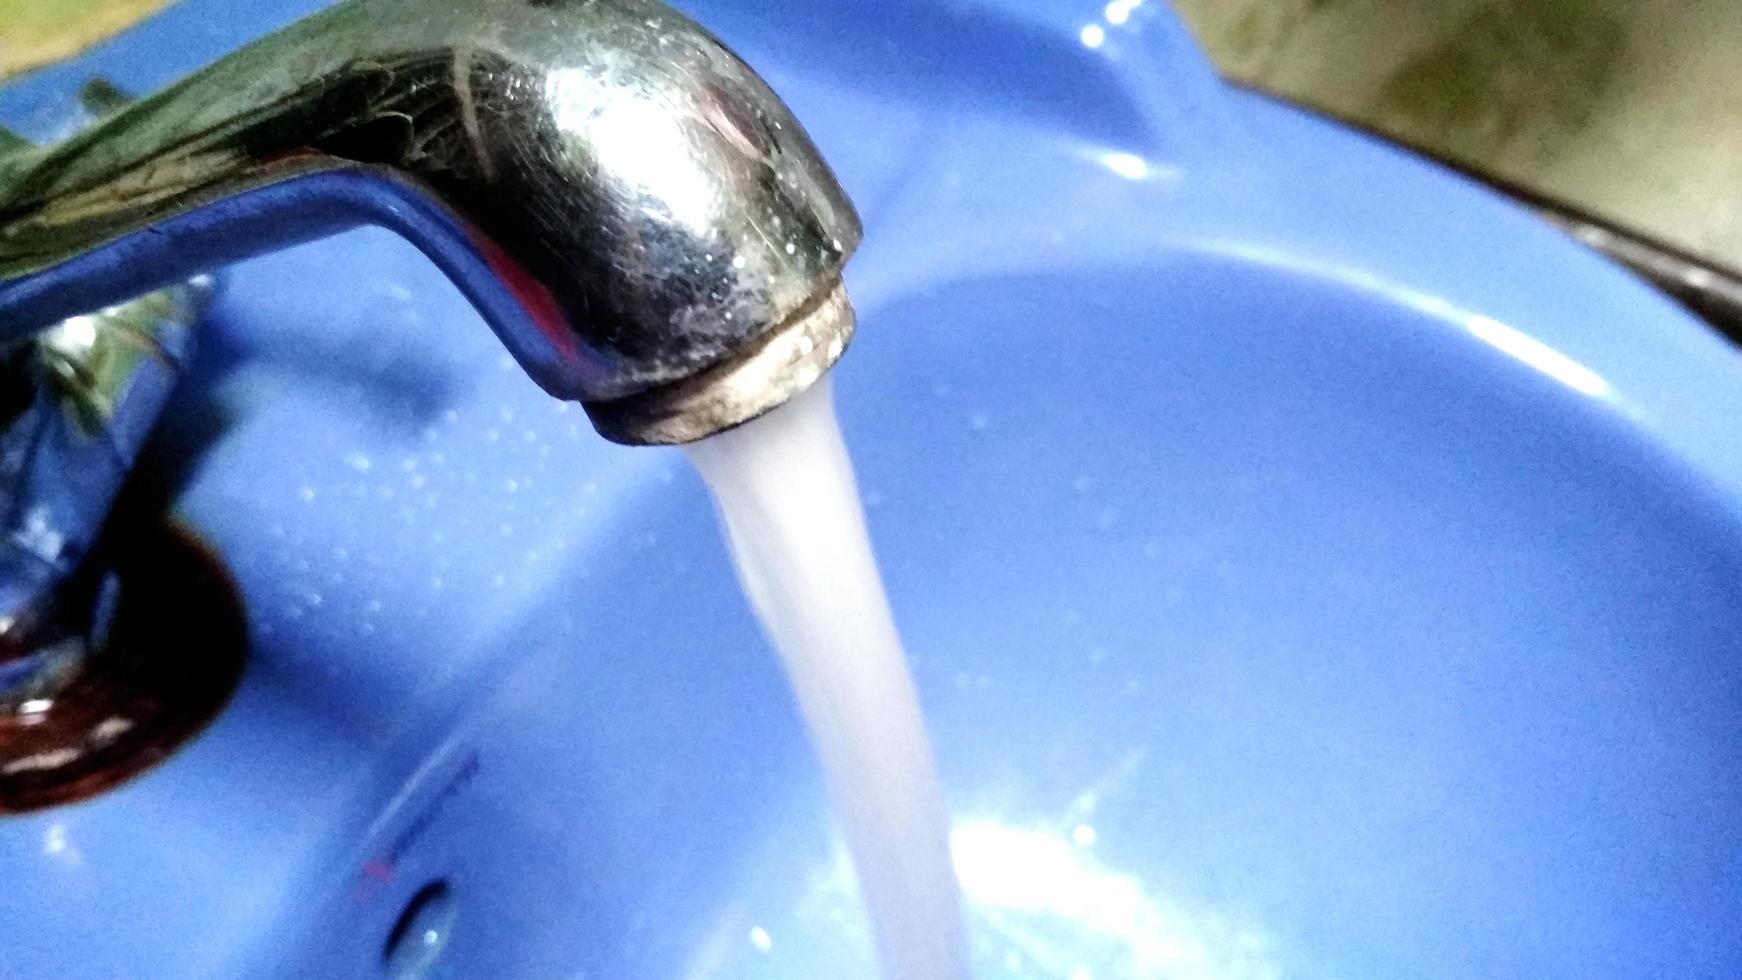 Water runs from a metal water tap. Close up photo